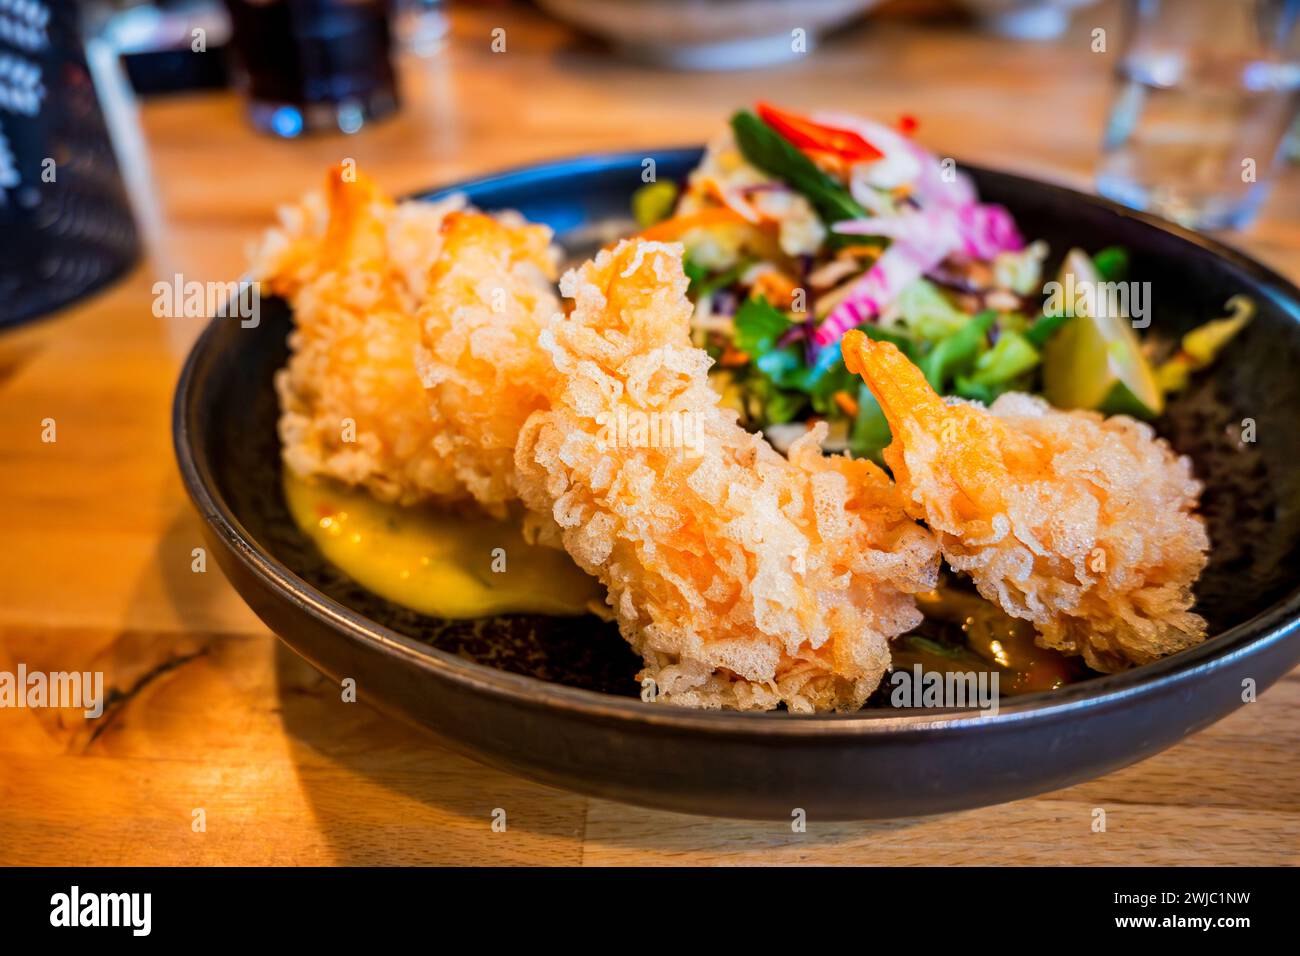 Fried tempura shrimp with mango sauce and salad in bowl on table with glass of water. Stock Photo